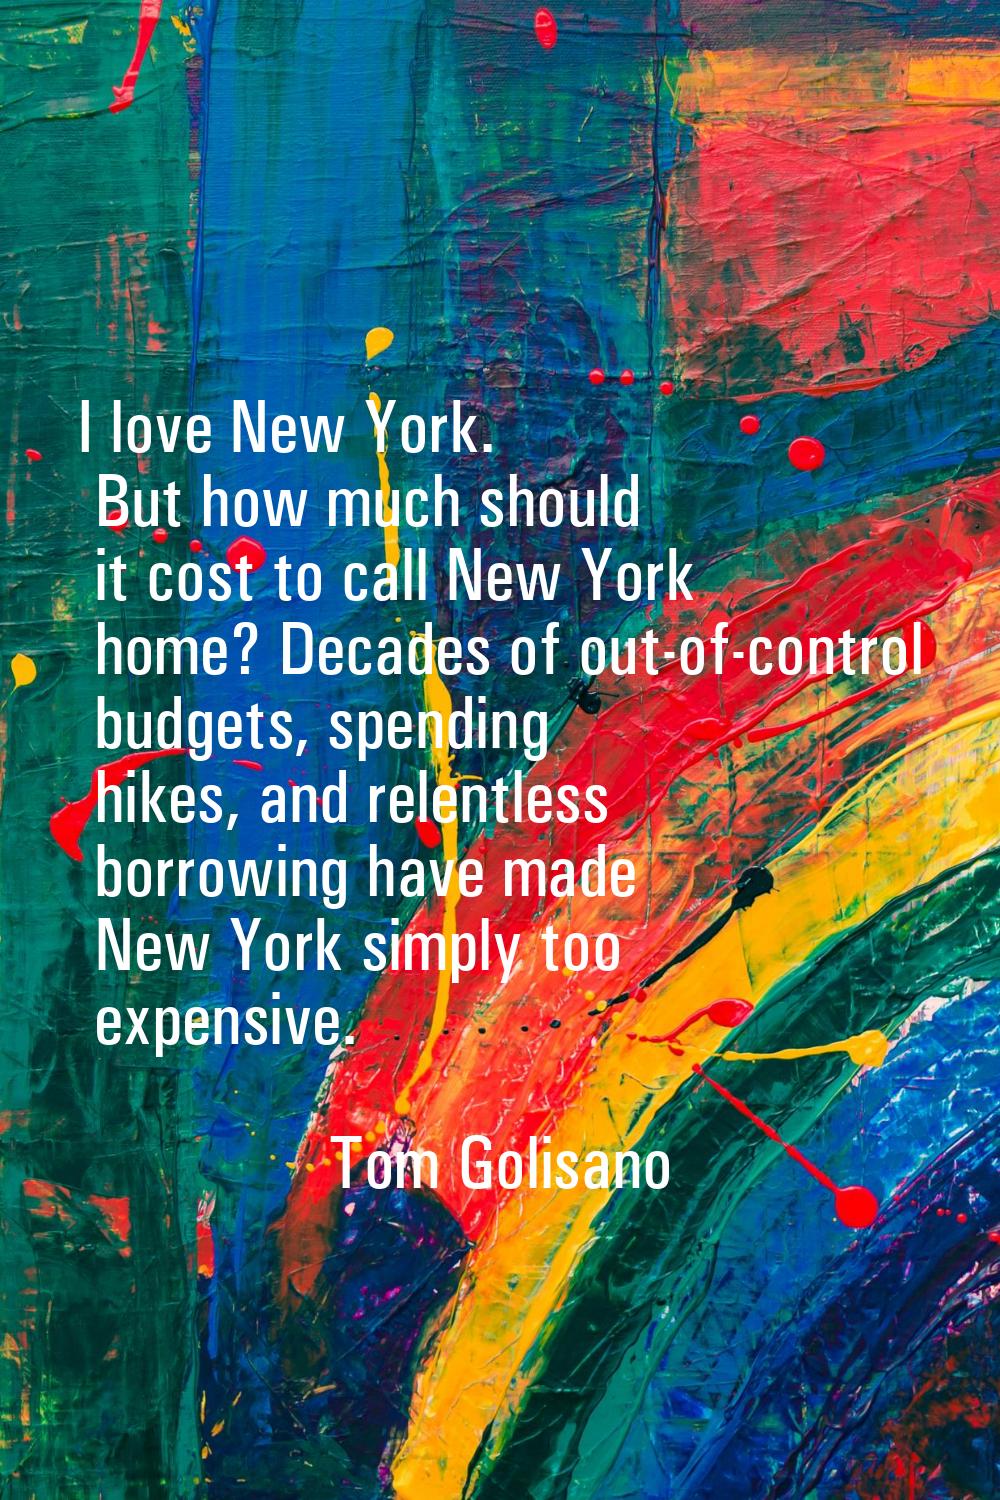 I love New York. But how much should it cost to call New York home? Decades of out-of-control budge